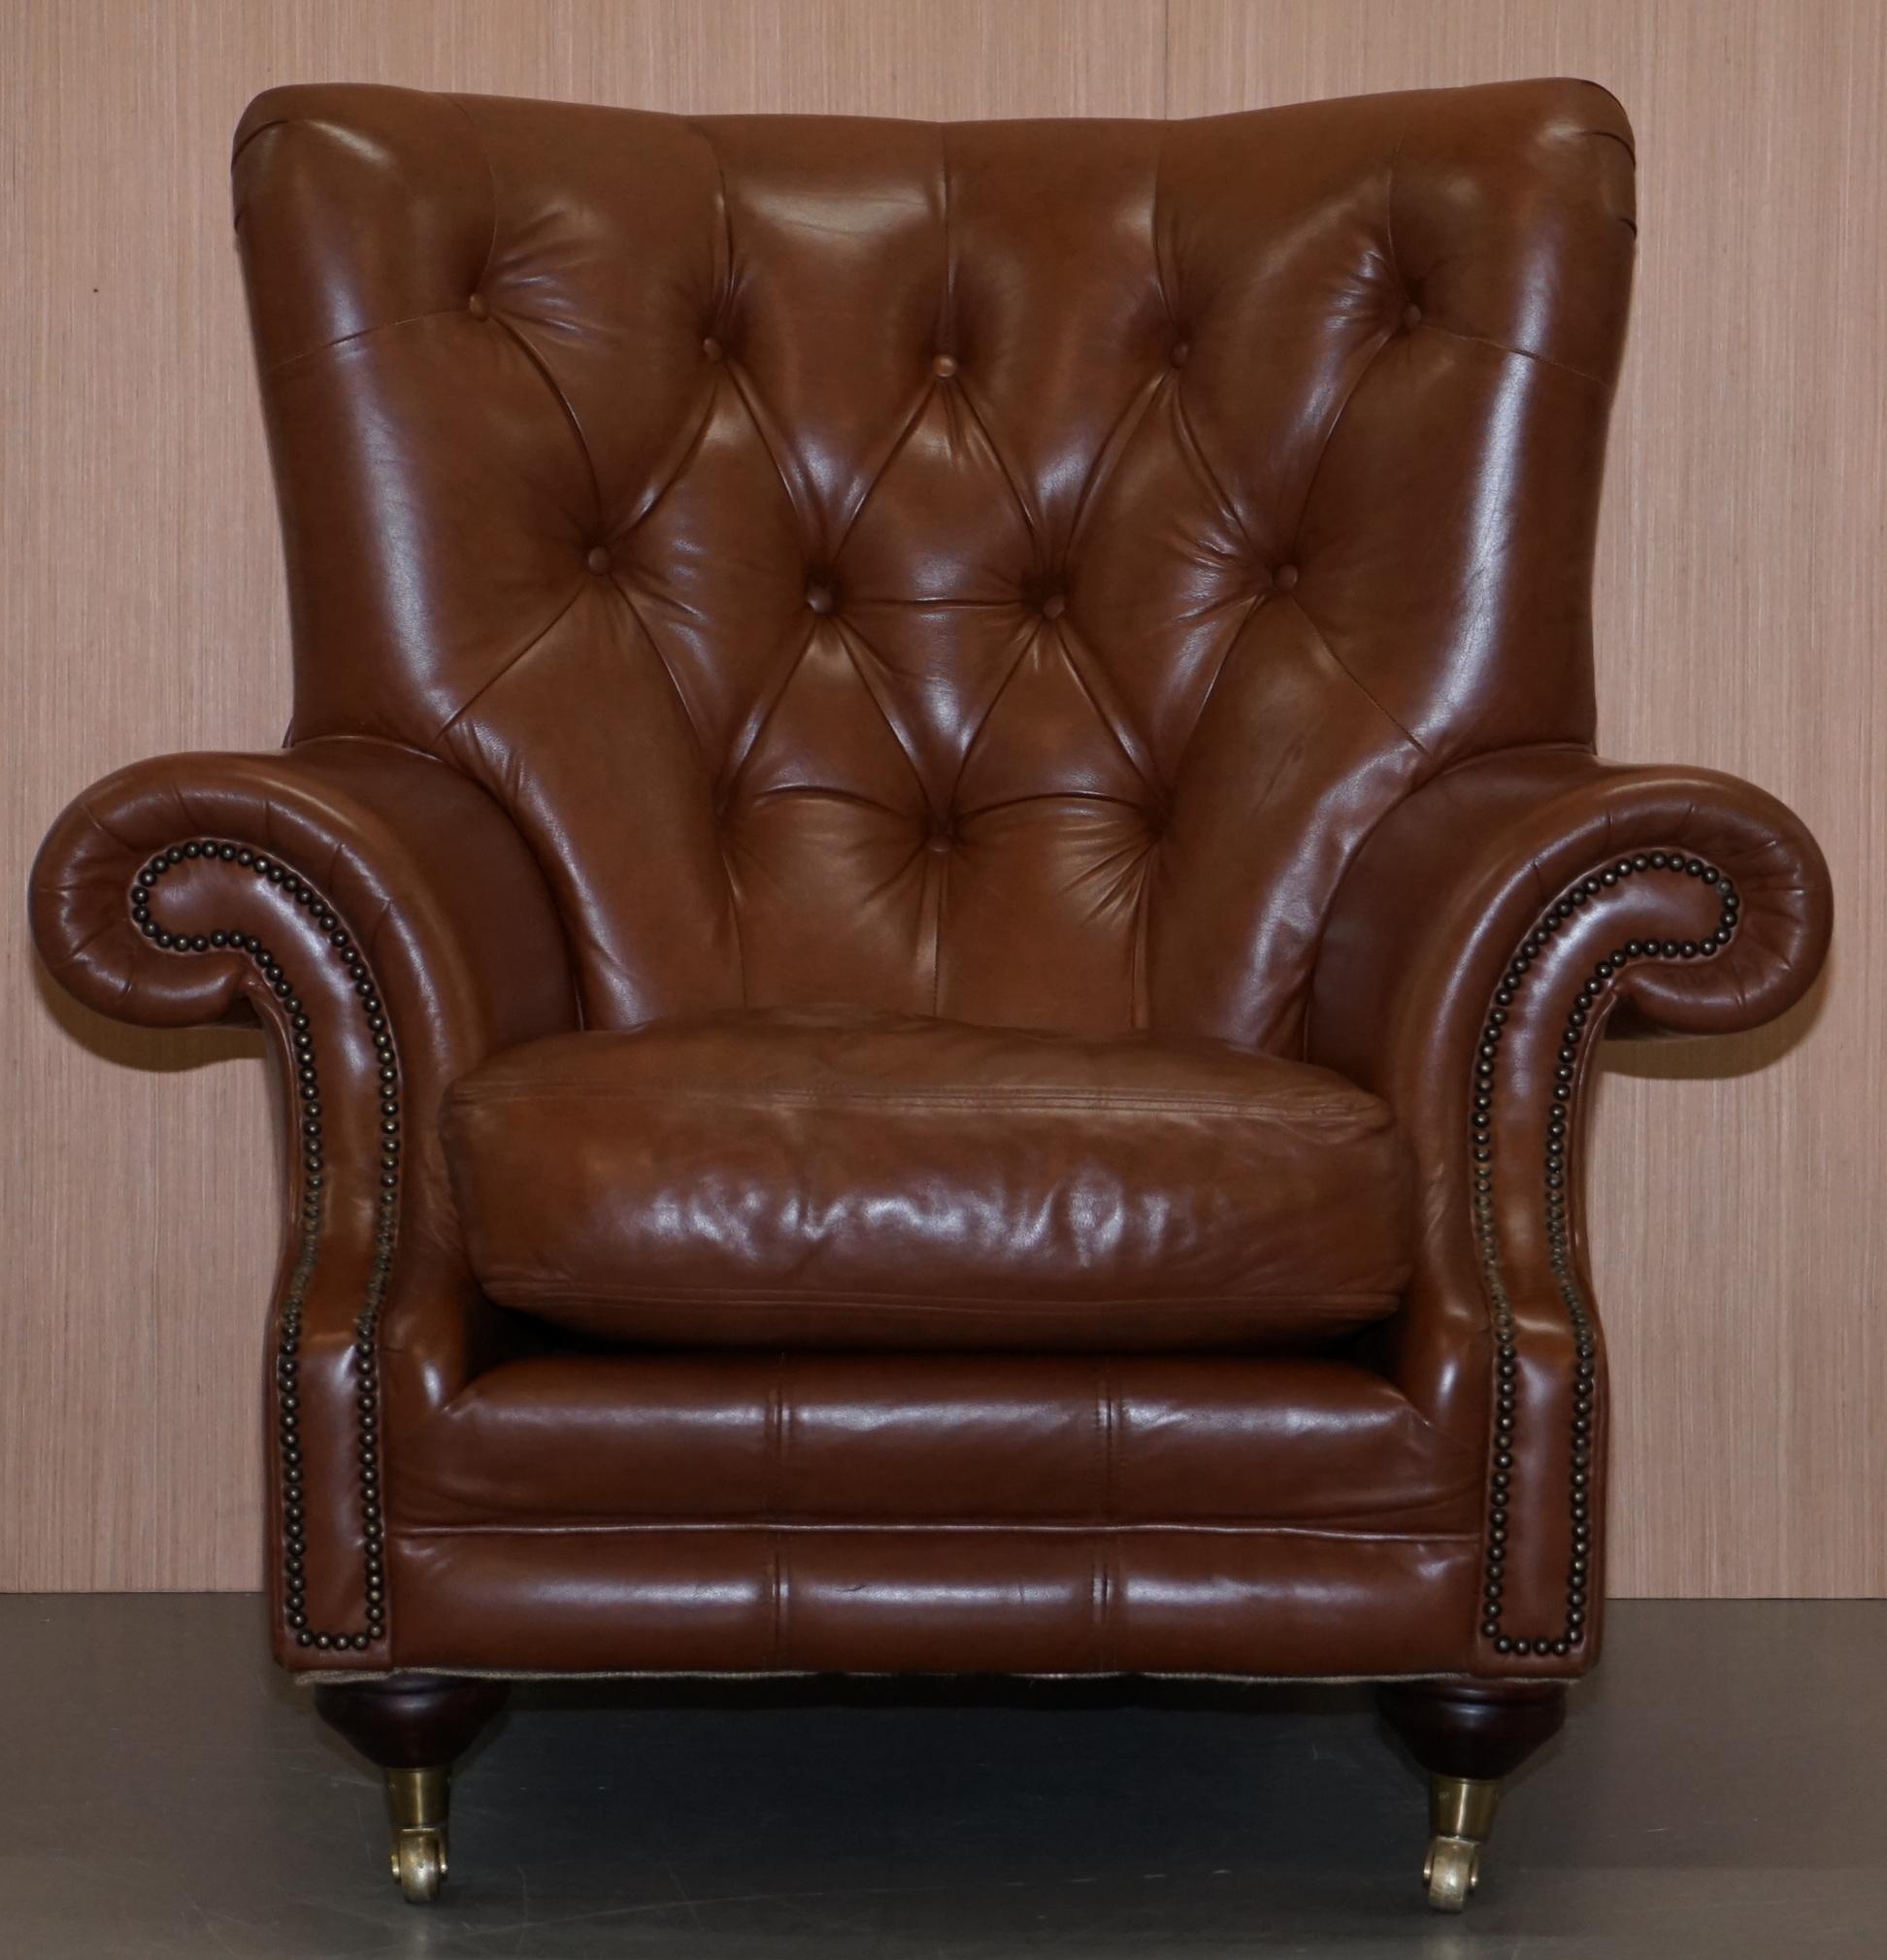 We are delighted to offer for sale this stunning RRP £1699 Medallion upholstery LTD San Remo Tan brown leather Chesterfield armchair which is part of a suite

The suite came from a rather prestigious clients mansion home in Chelsea, they had the